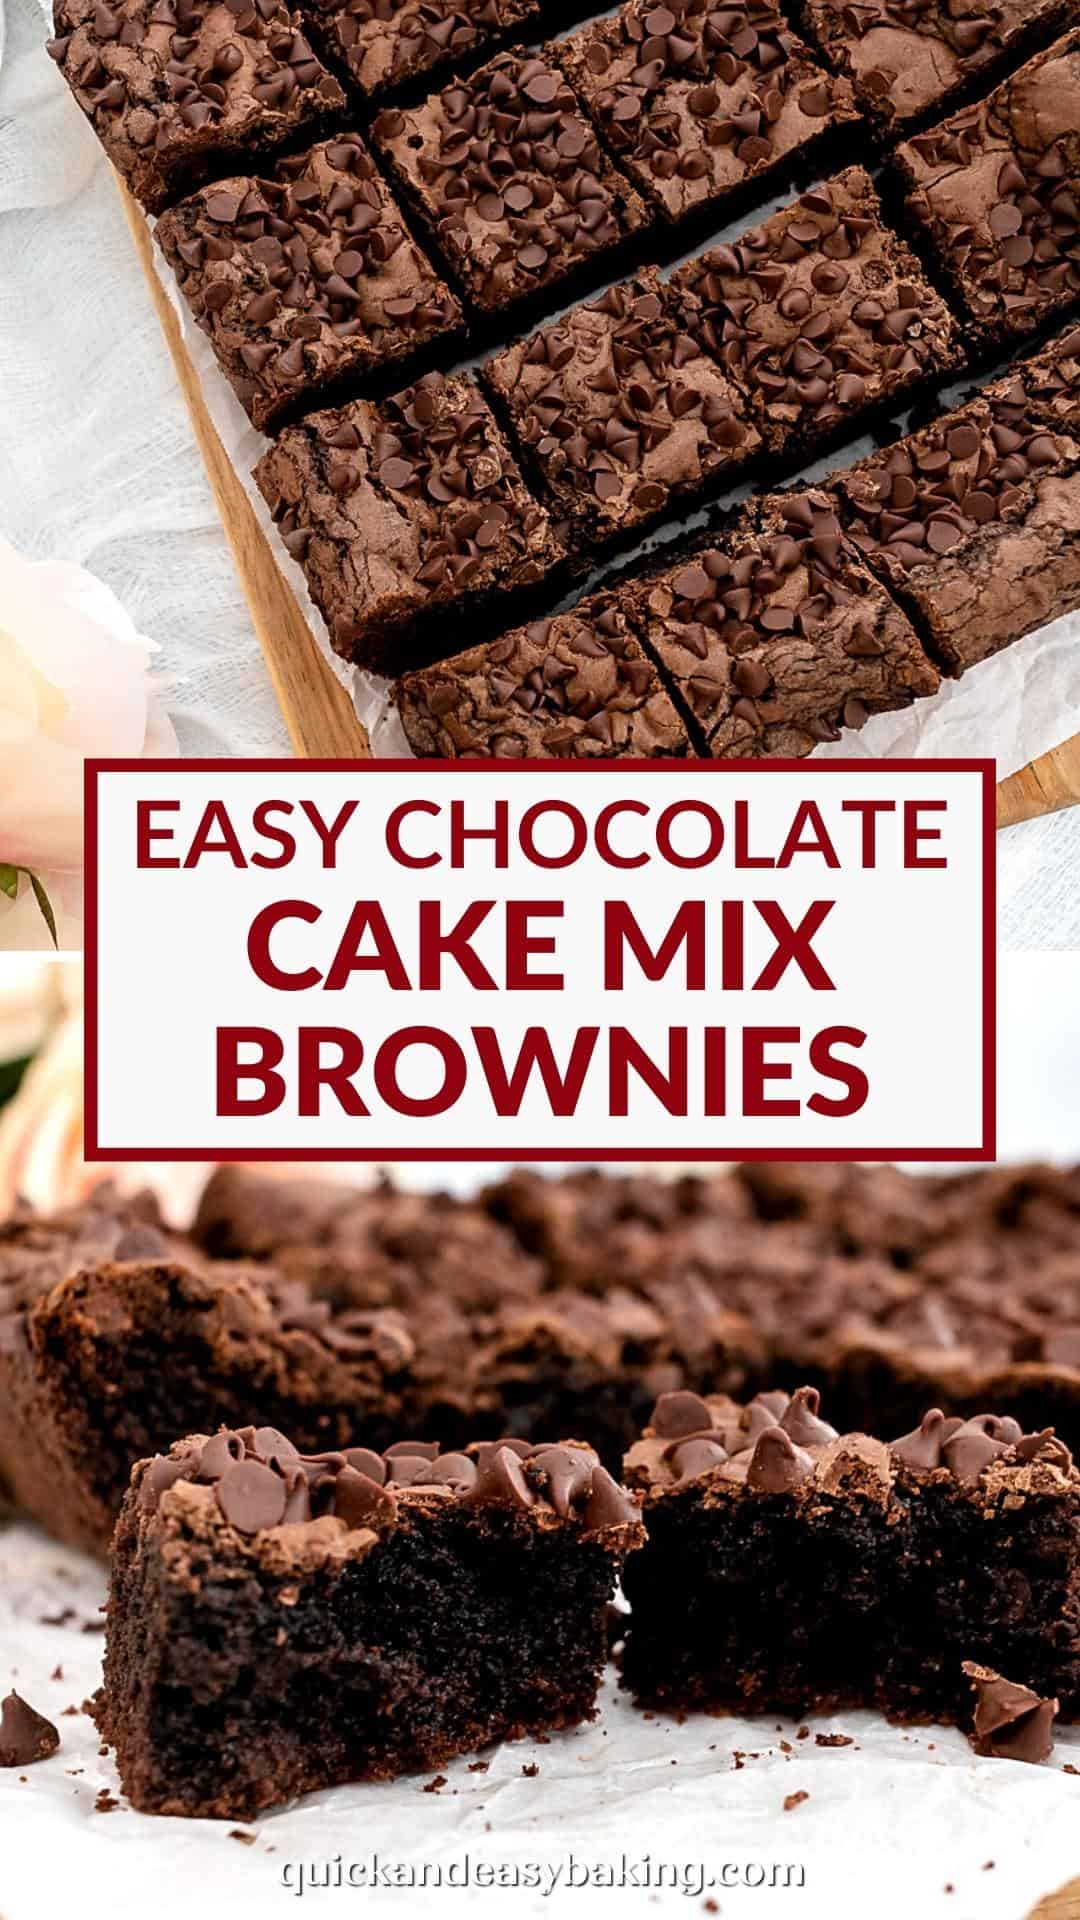 Collage of baked brownies with text overlay pin.